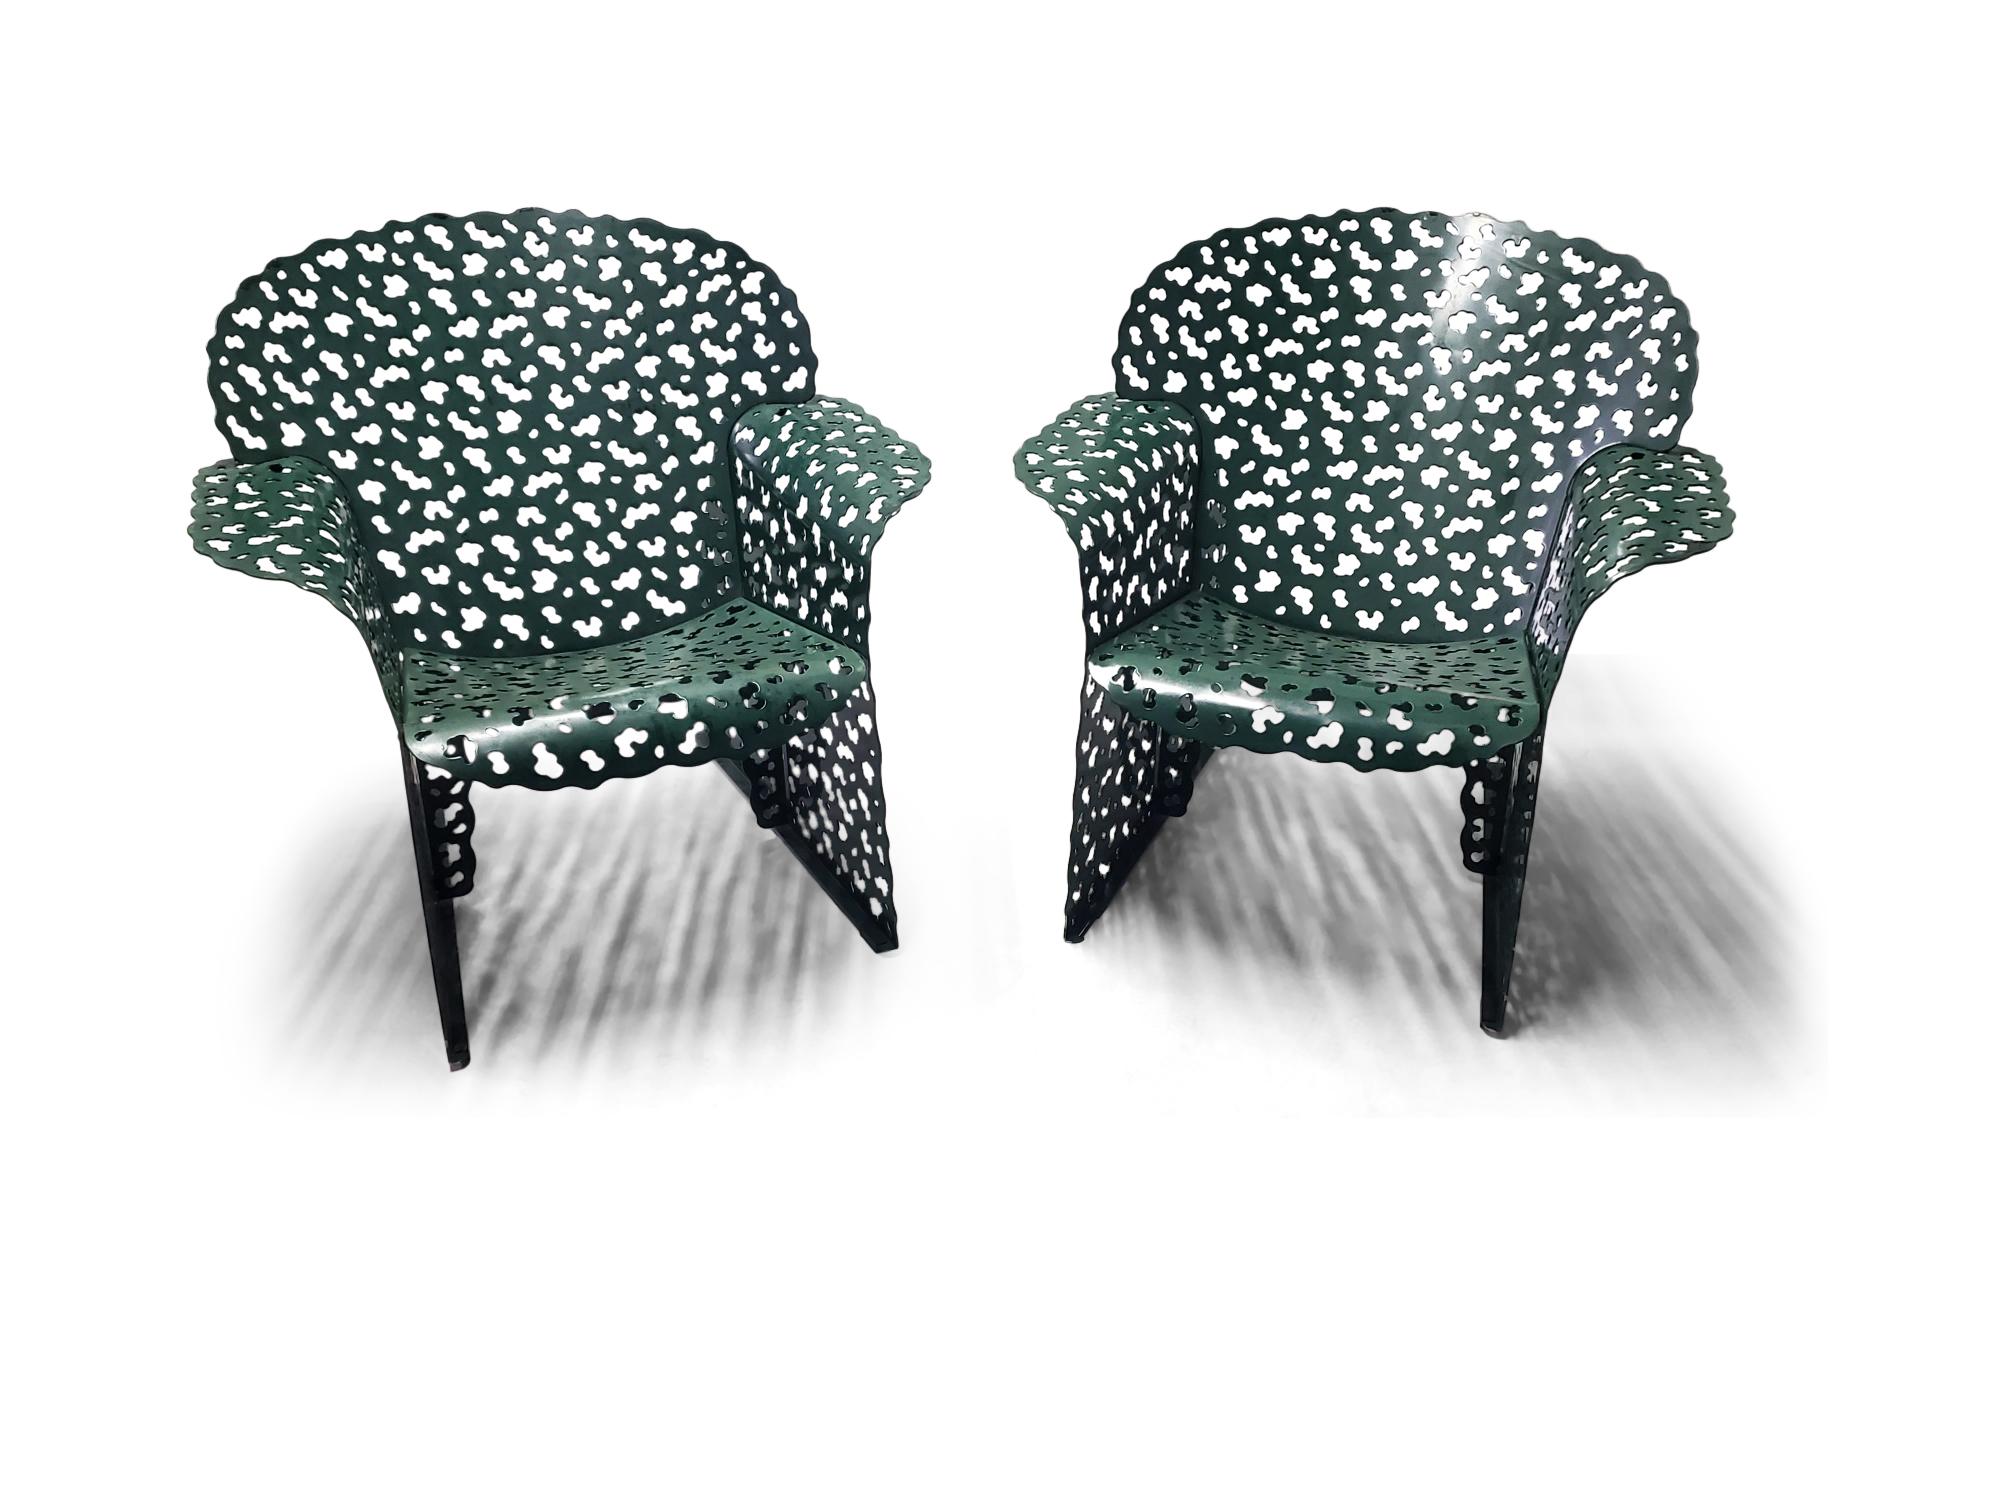 Pair of Richard Schultz for Knoll Topiary Collection Lounge Chairs 1997 2